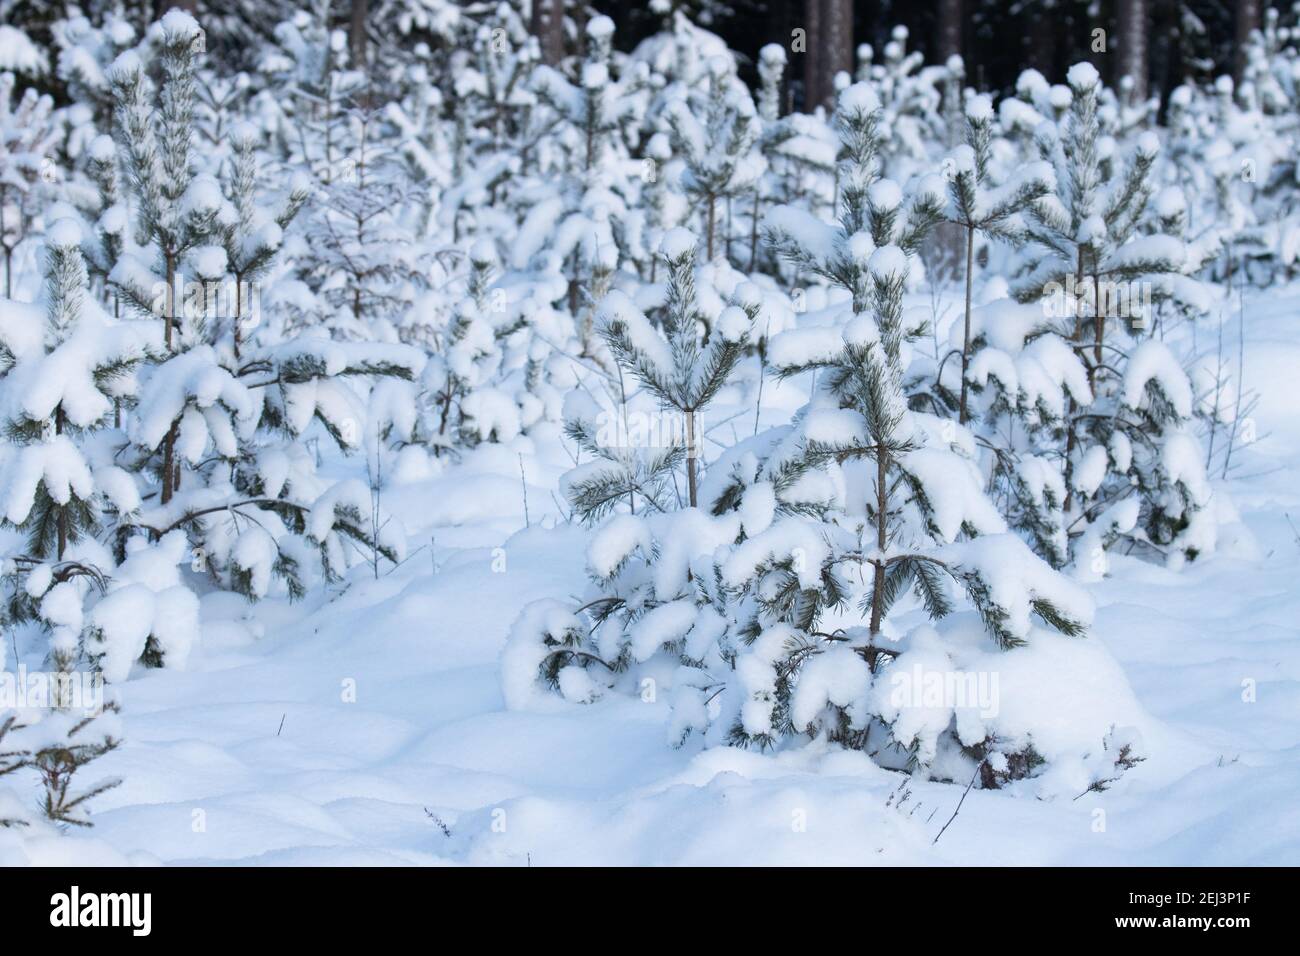 Small and young Baltic pine or Scots pine, Pinus sylvestris trees on a forest land during a snowy winter in Estonia, Northern Europe. Stock Photo